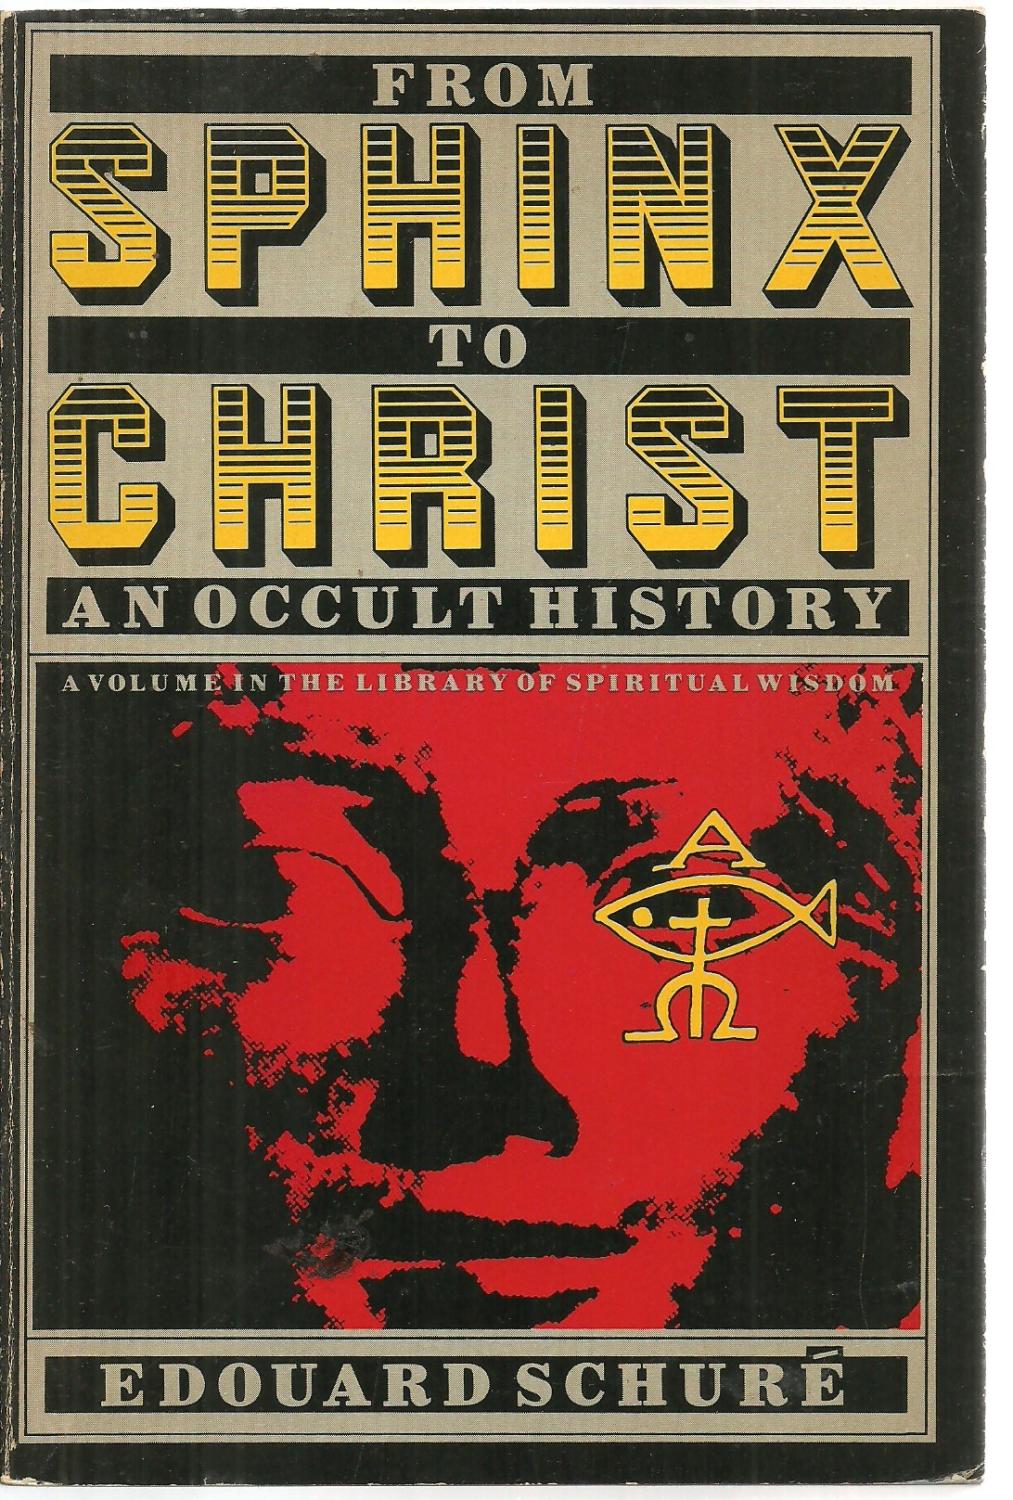 From Sphinx To Christ: An Occult History - Edouard Schure